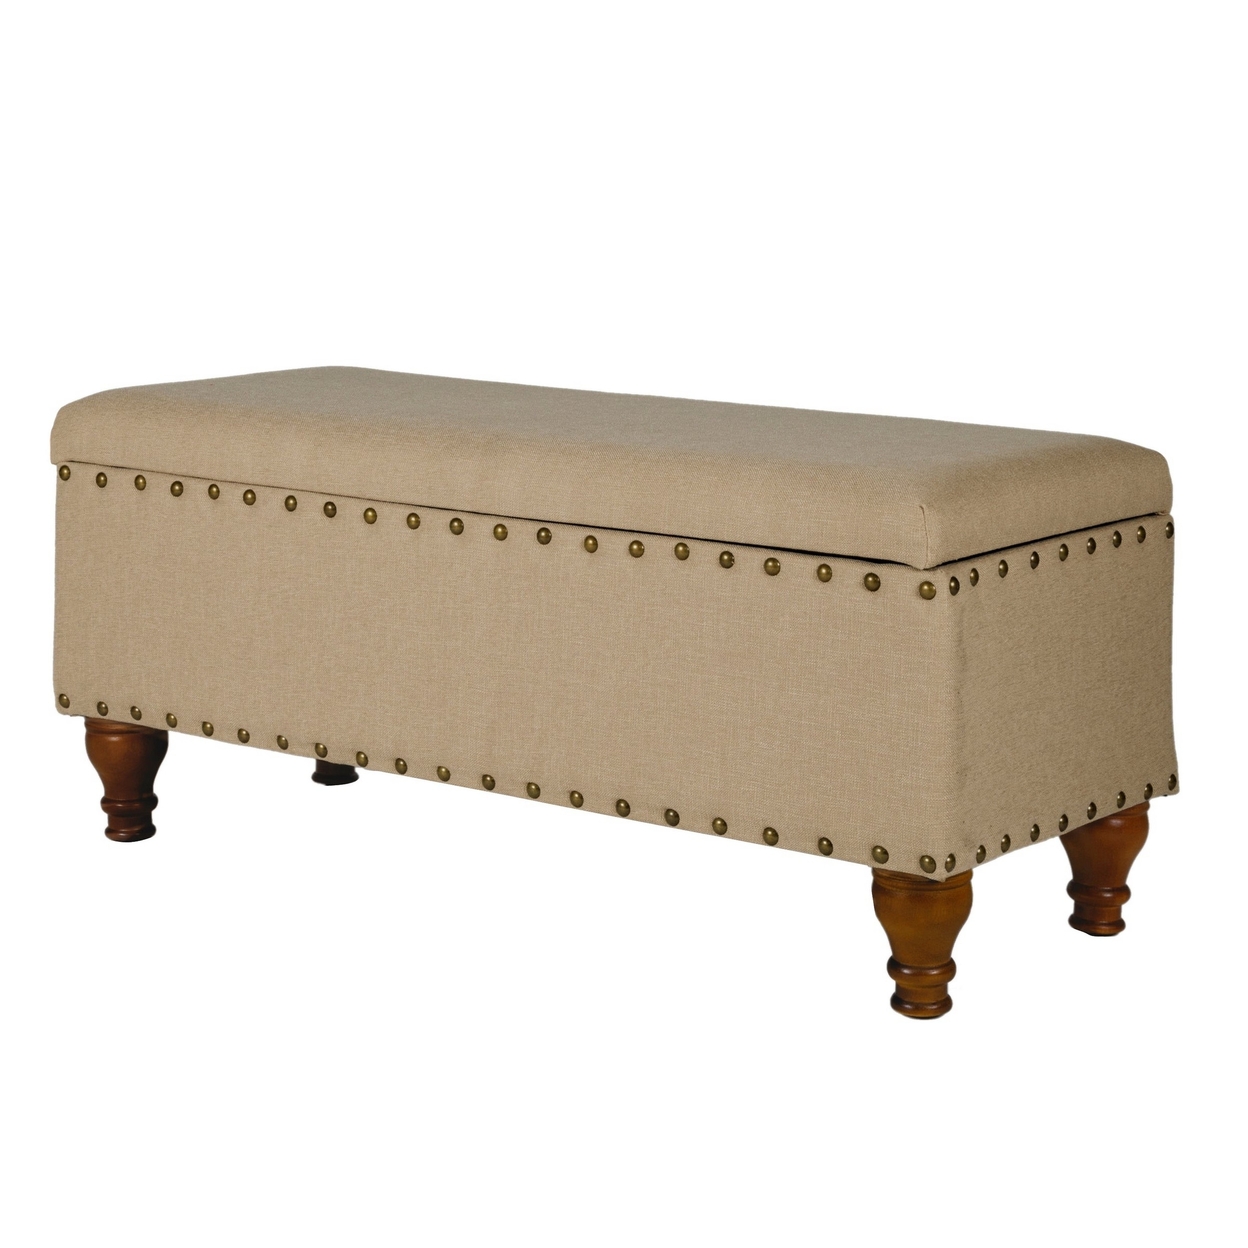 Fabric Upholstered Wooden Storage Bench With Nail Head Trim, Large, Tan Brown- Saltoro Sherpi